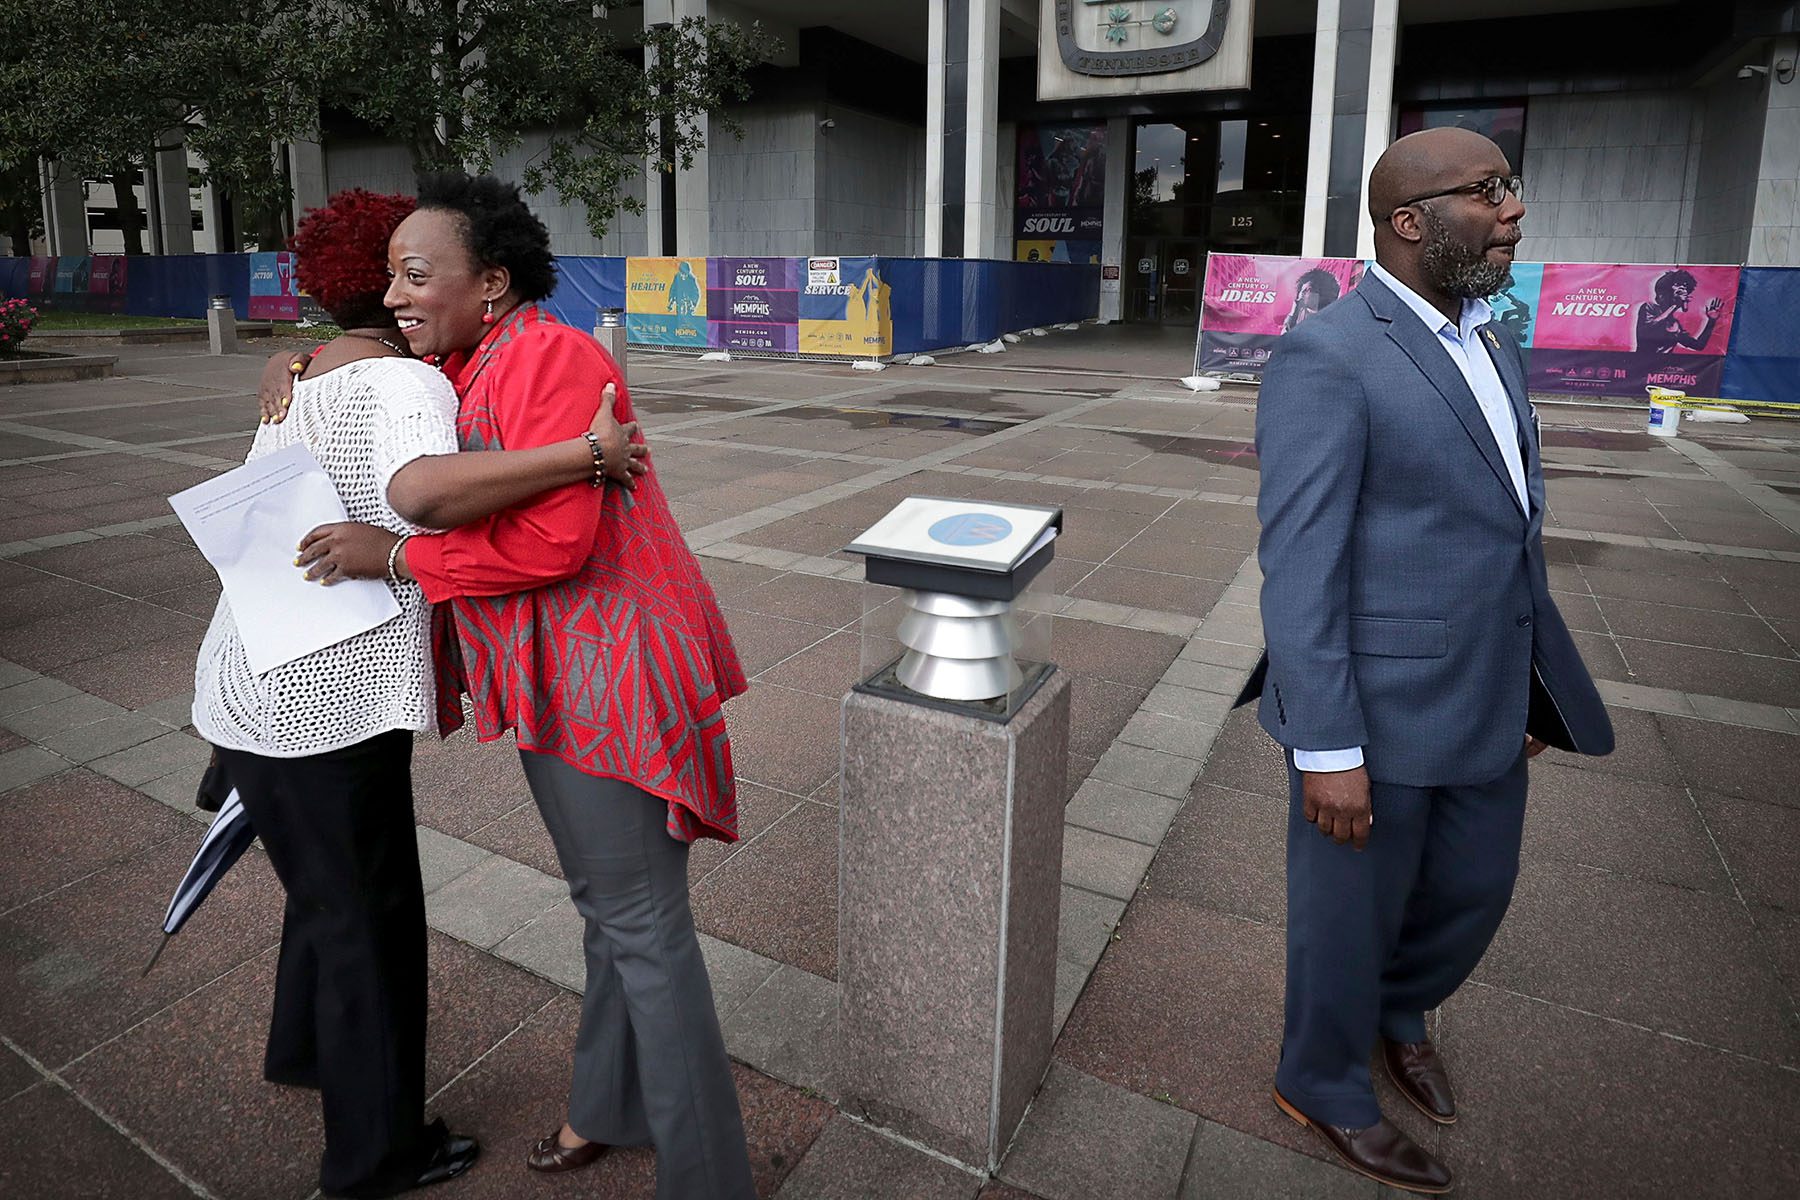 Activist Pamela Moses hugs a woman before a May Day Rally outside City Hall in Memphis.